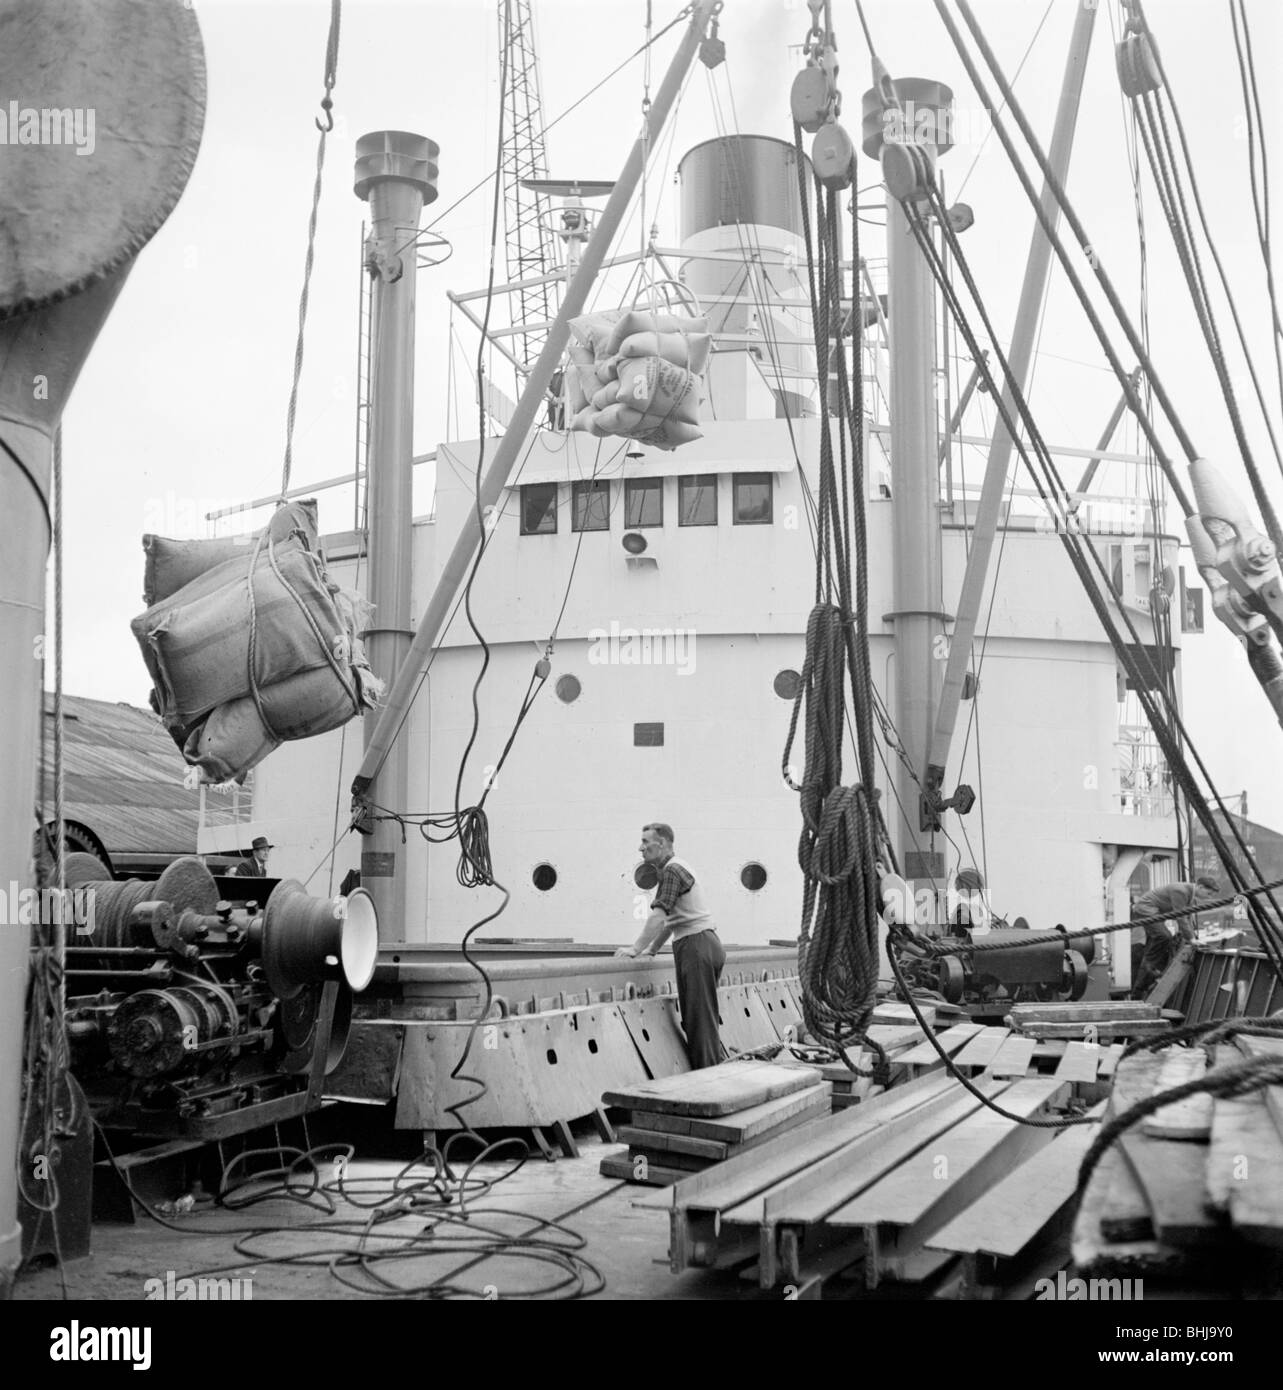 Loading a ship at the North Quay, West India Docks, London, c1945-c1965. Artist: SW Rawlings Stock Photo